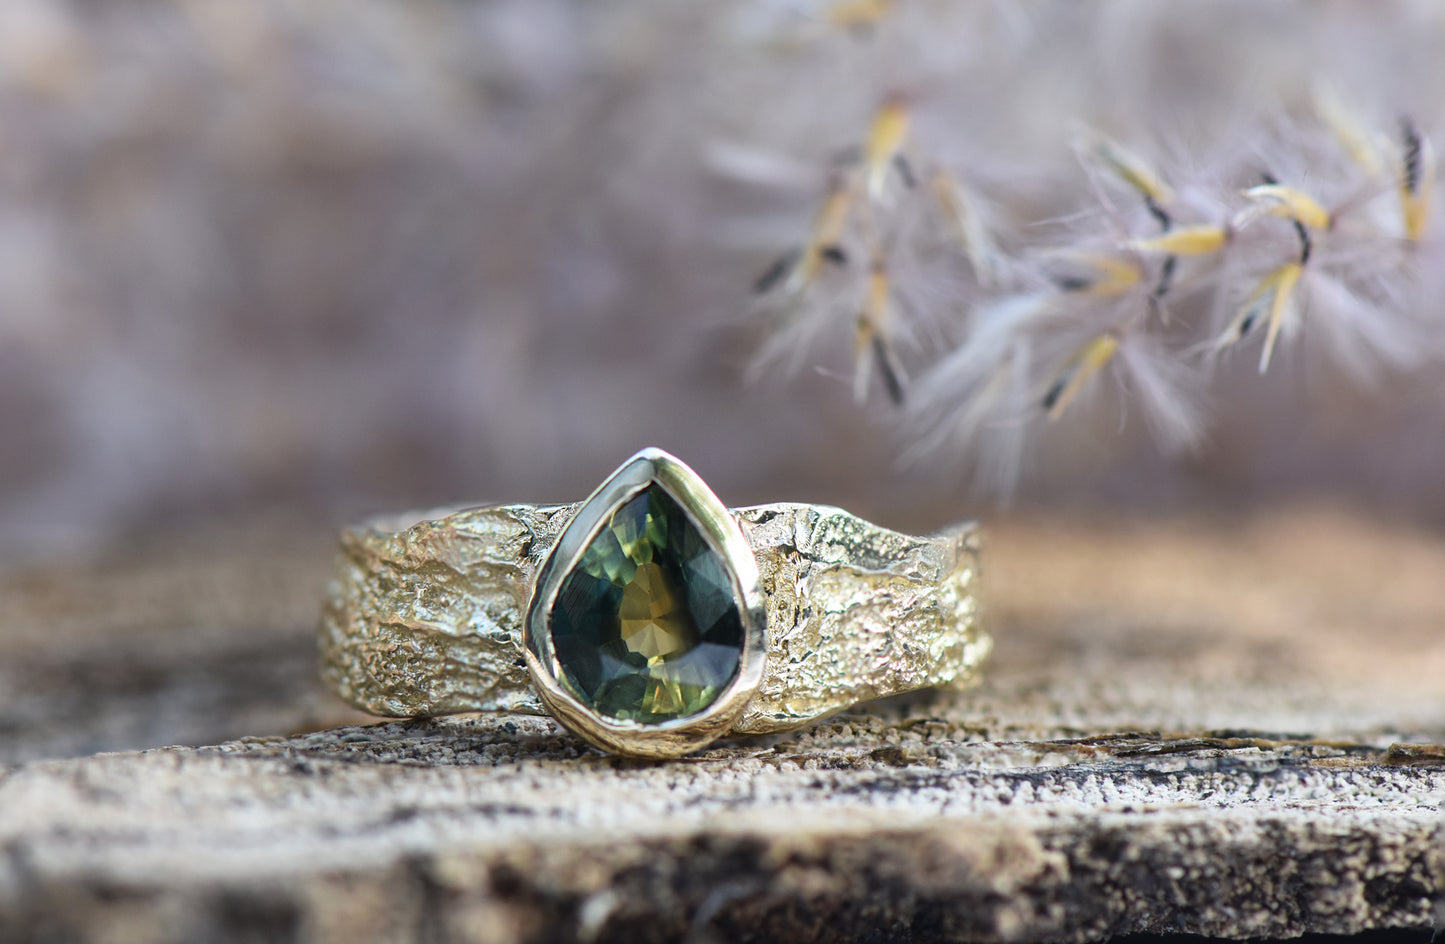 14ct Gold and Green Montana Sapphire on wide London Plane Band